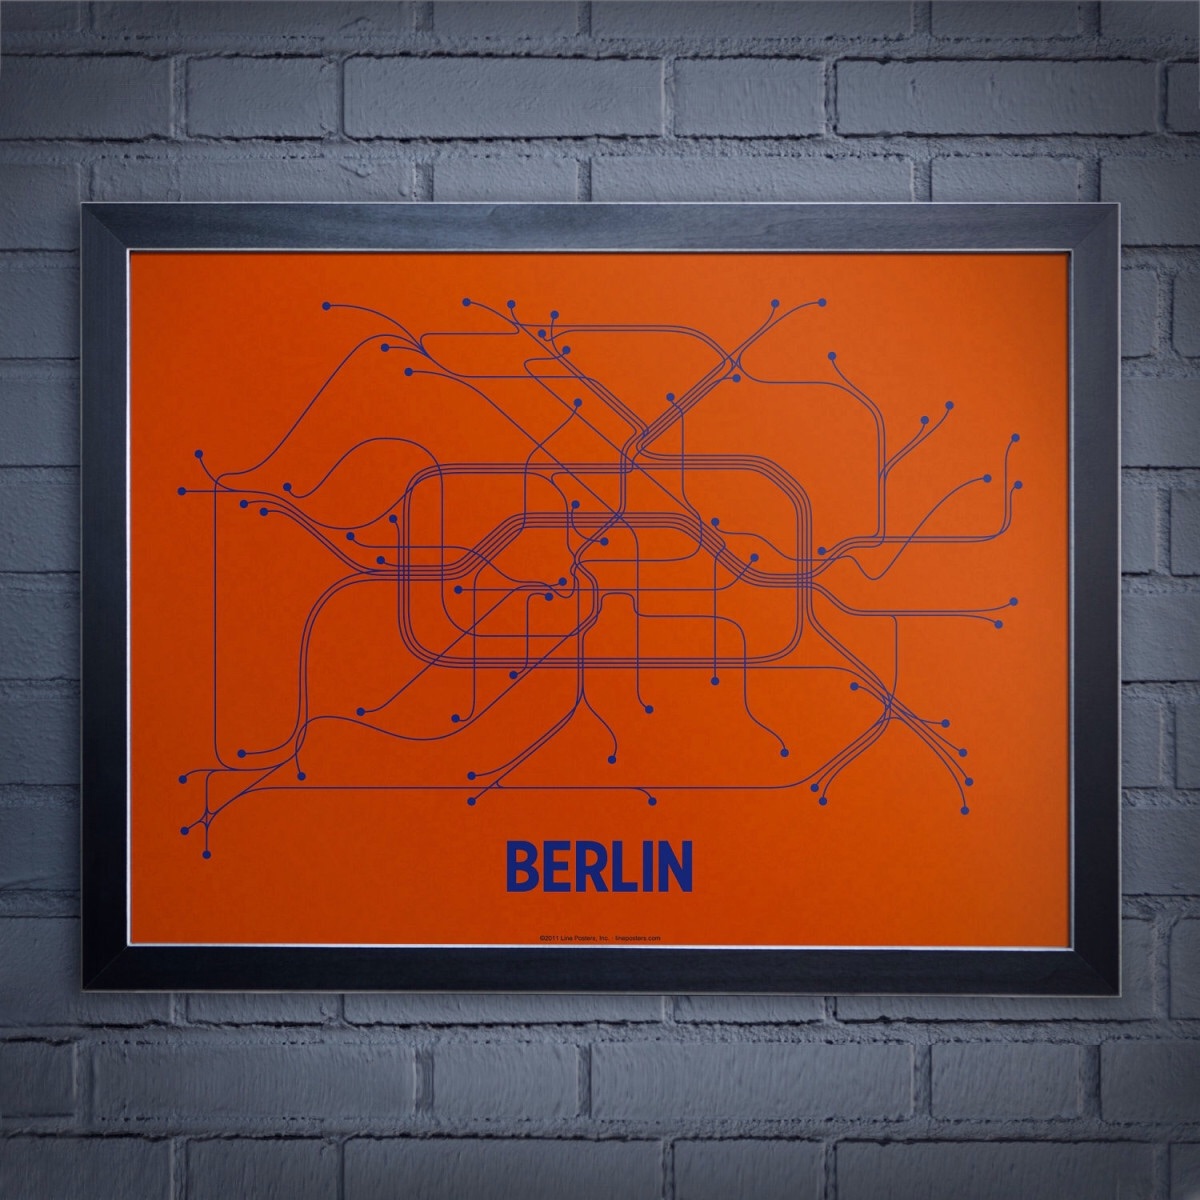 Berlin (coral & navy) print from the Lineposters project.